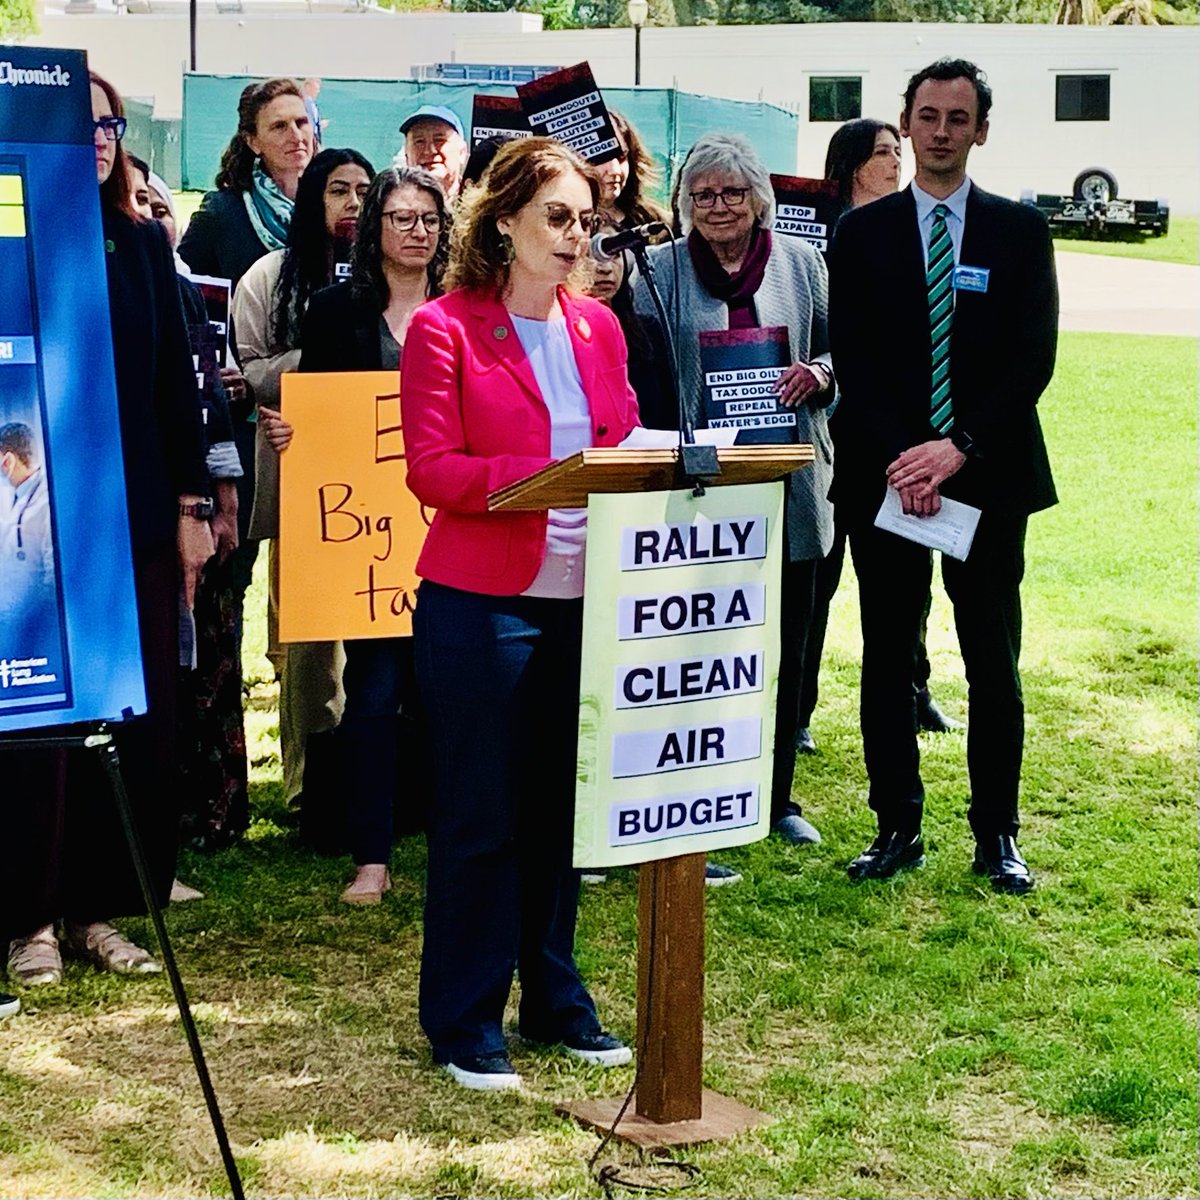 At yesterday's Climate Budget Defense Coalition press conference, I advocated as CA Legislative Central Coast Caucus Chair for urgent funding to combat megafloods, wildfires, and mudslides. Our coast's safety and economy depend on investments in resilience and renewable energy.